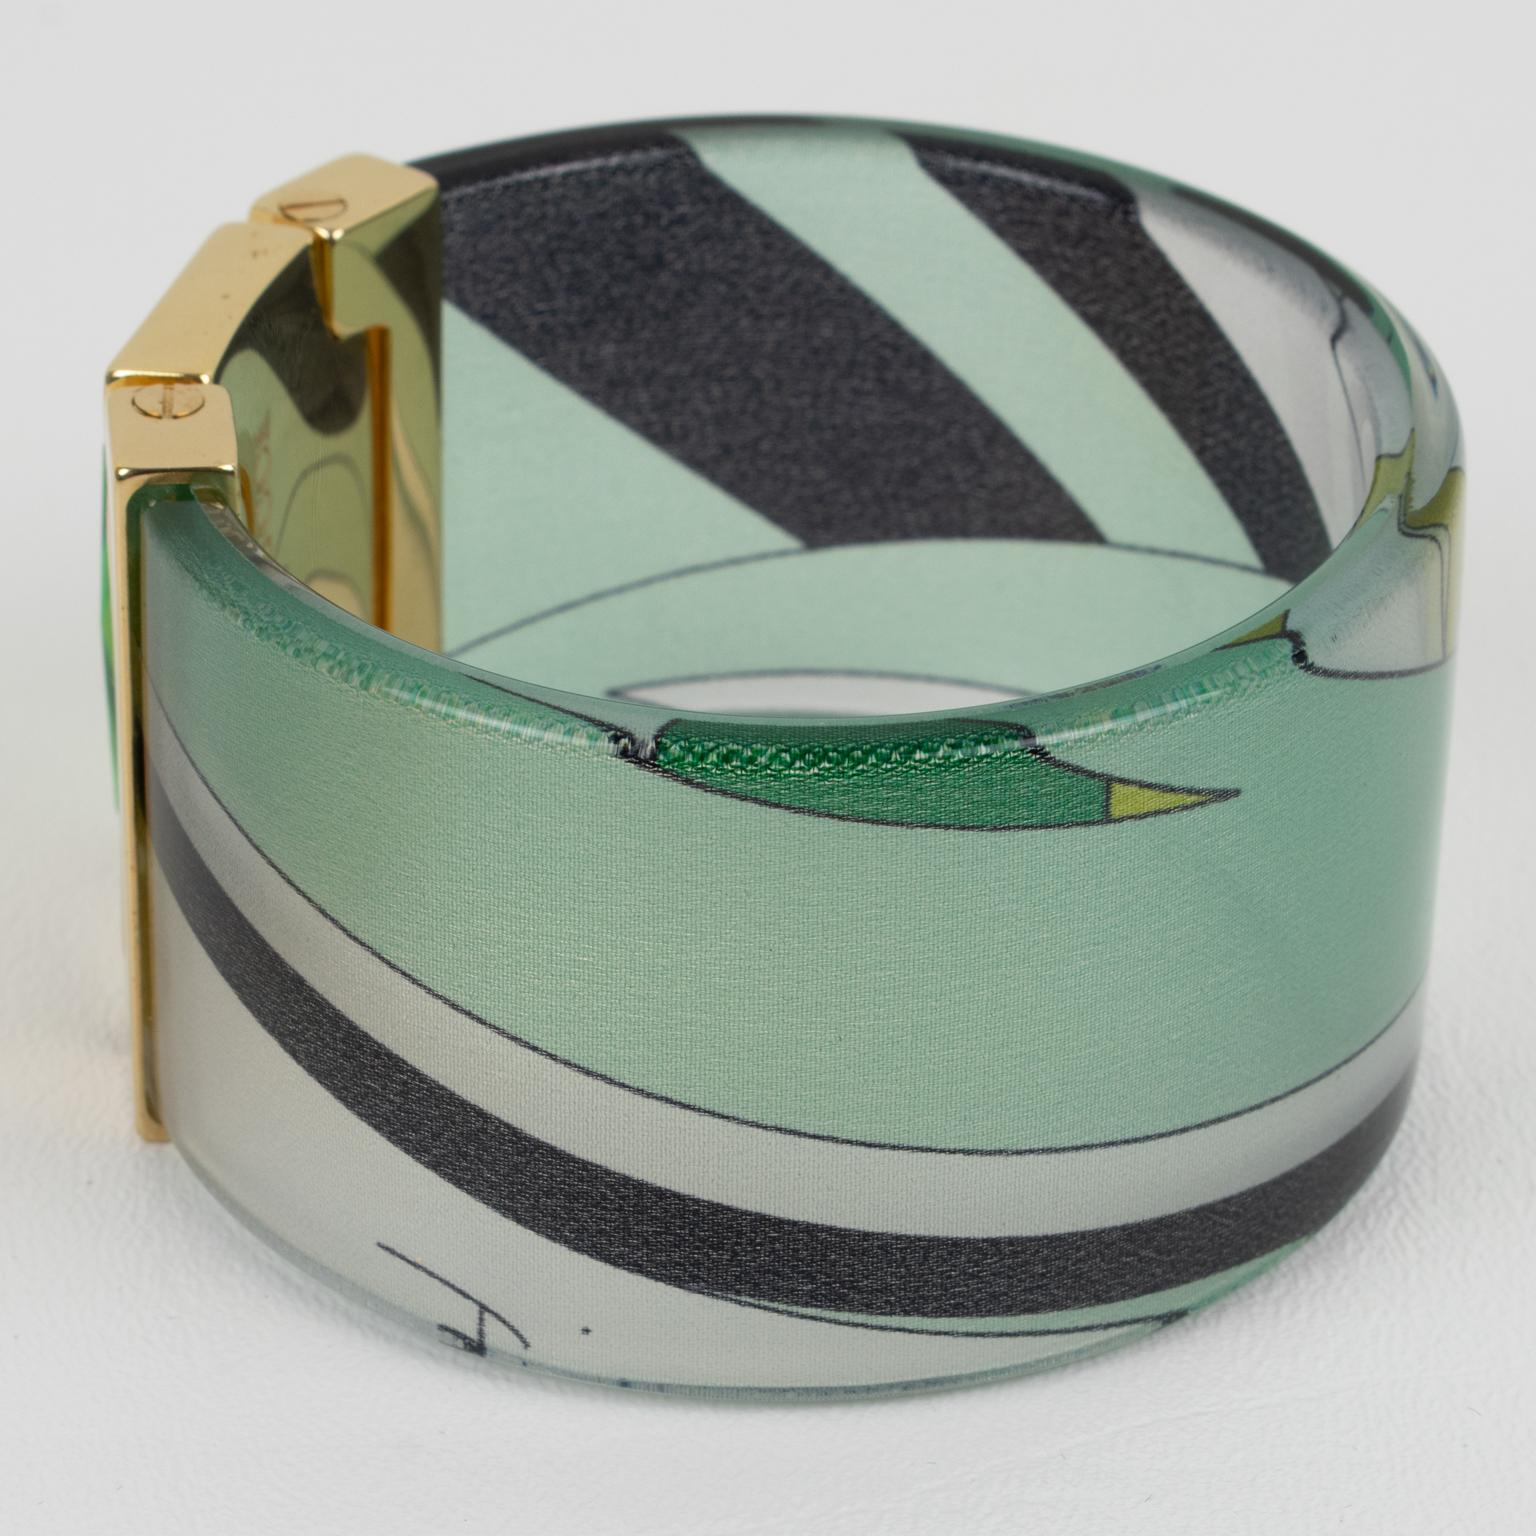 Emilio Pucci Jeweled Bracelet Bangle Lucite with Green and Black Silk Inclusion For Sale 2